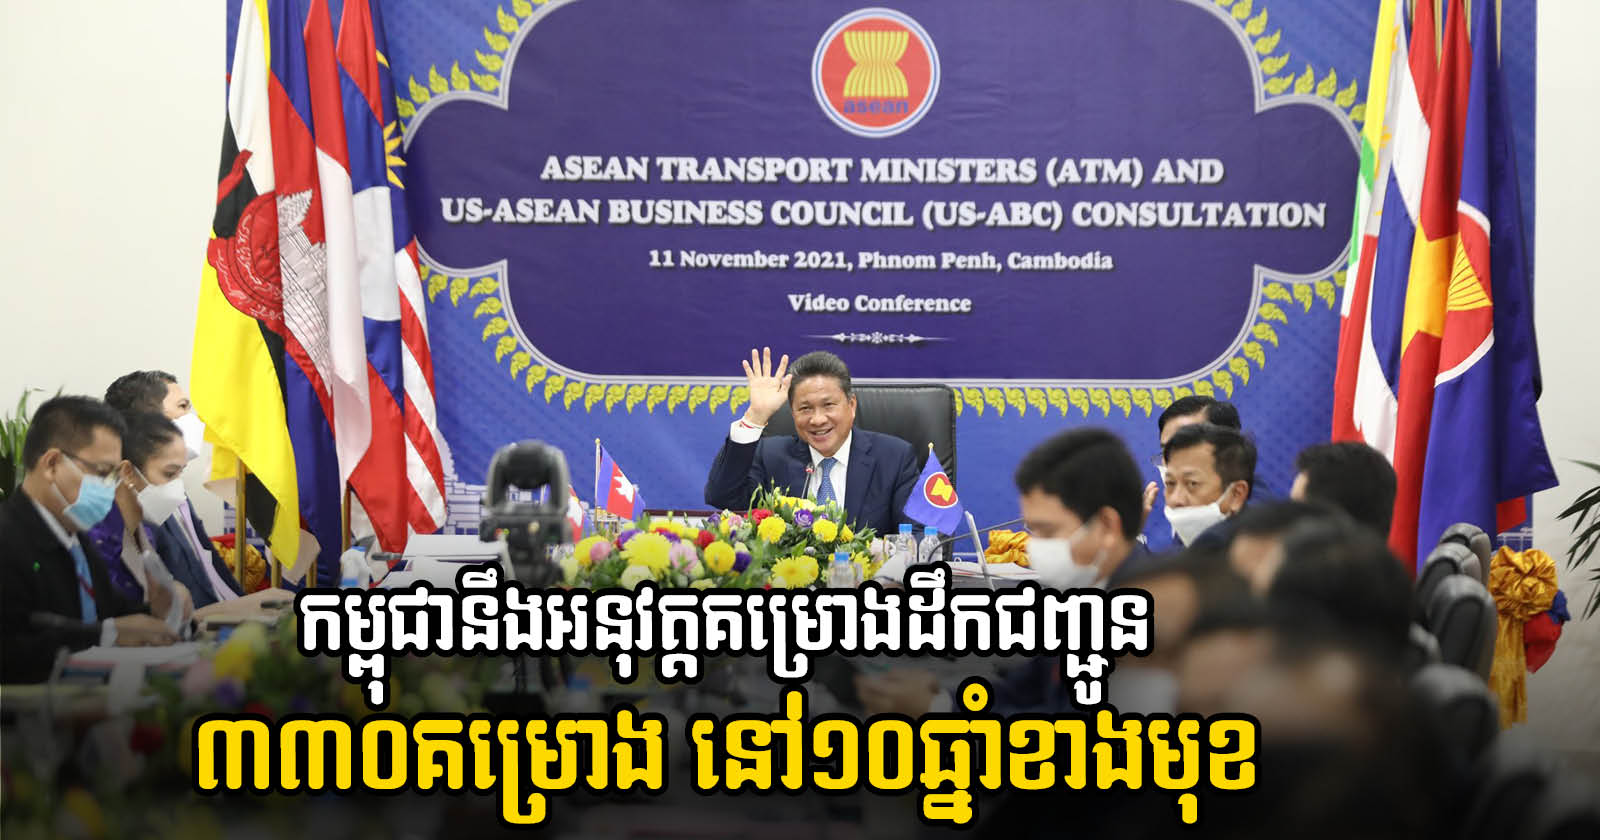 Cambodia Needs US$48bn to Implement 330 Projects in Transportation Sector in 10 Years